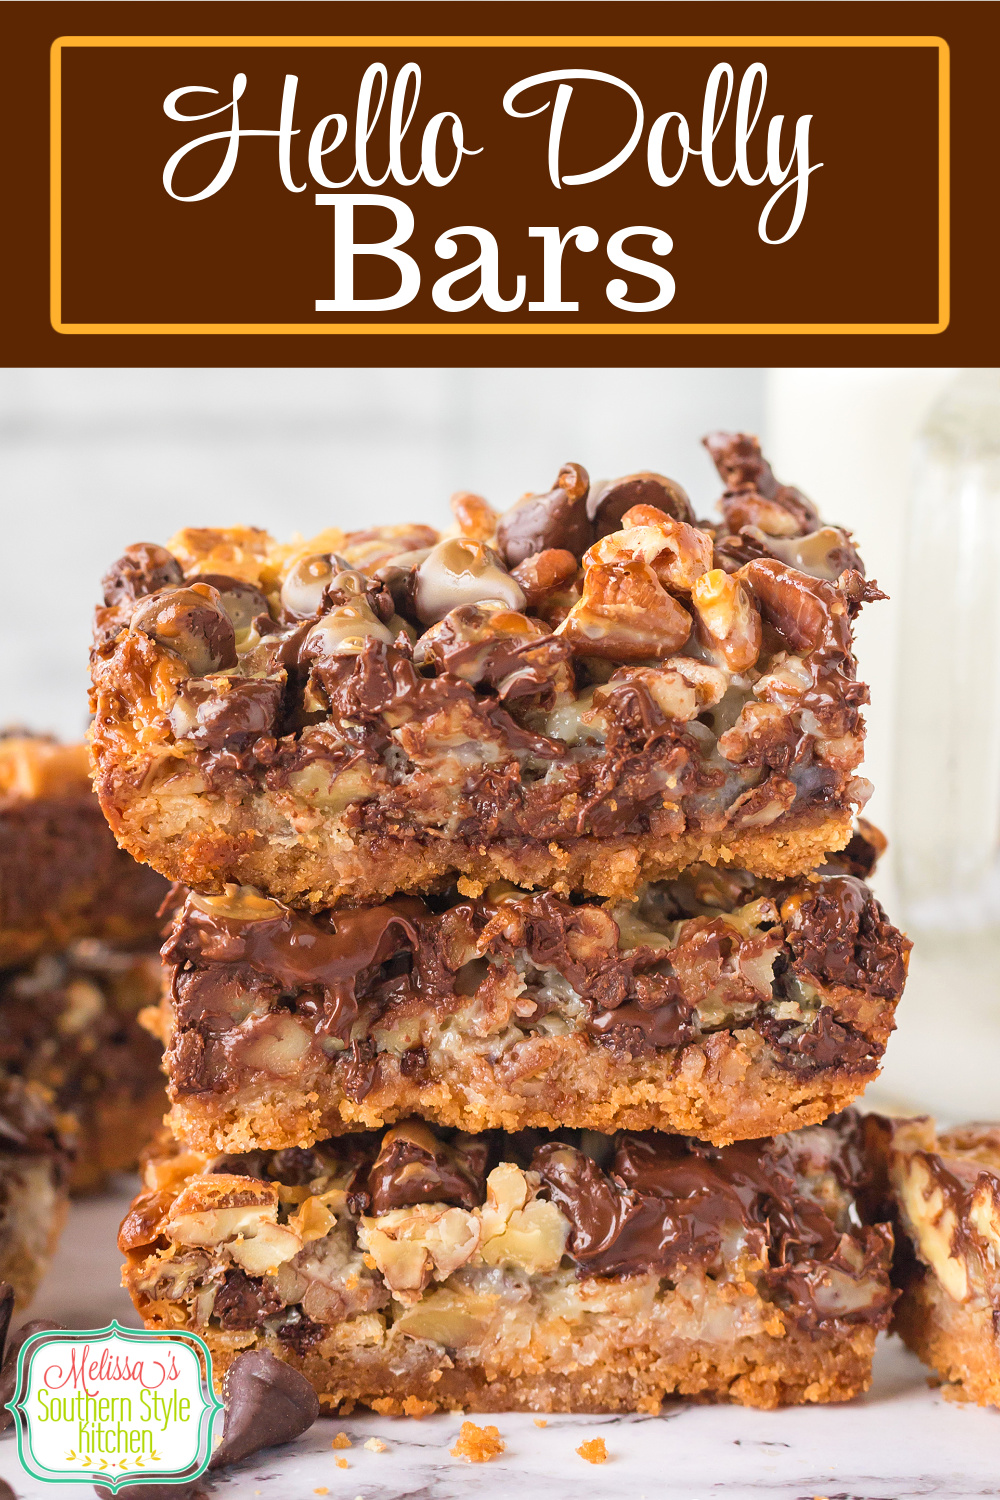 These scrumptious Hello Dolly Bars a.k.a. Magic Cookie Bars are ideal for tailgating, summer picnics, game day snacking and the holidays. #hellodollybars #cookiebars #magiccookiebars #7layerbars #layeredcookiebars #superbowldesserts #summerdesserts via @melissasssk